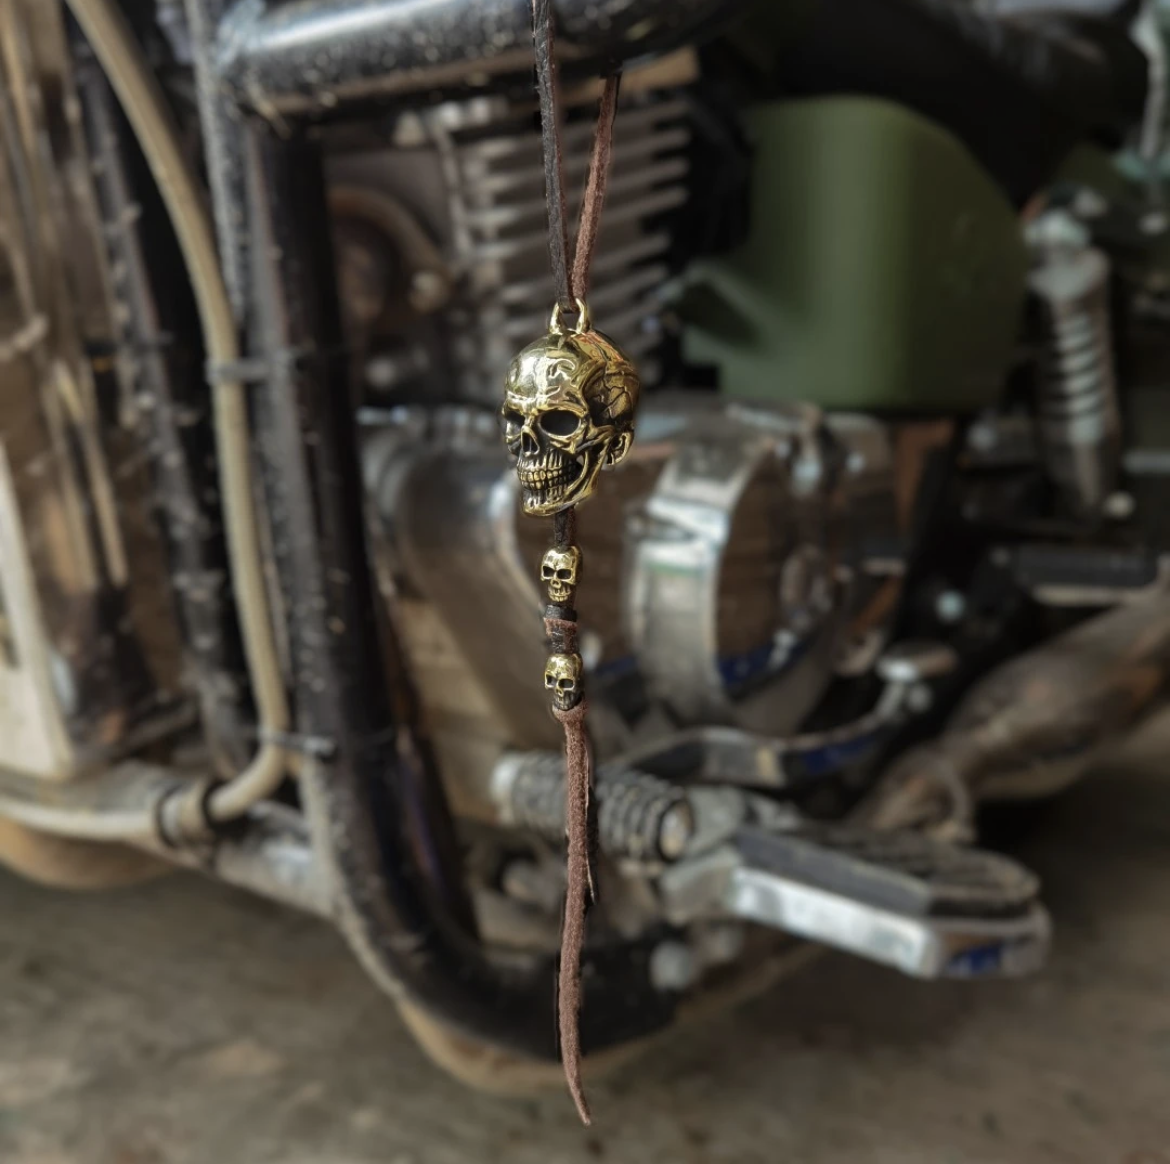 Motorcycle Biker Bell Accessory or Key Chain for Luck